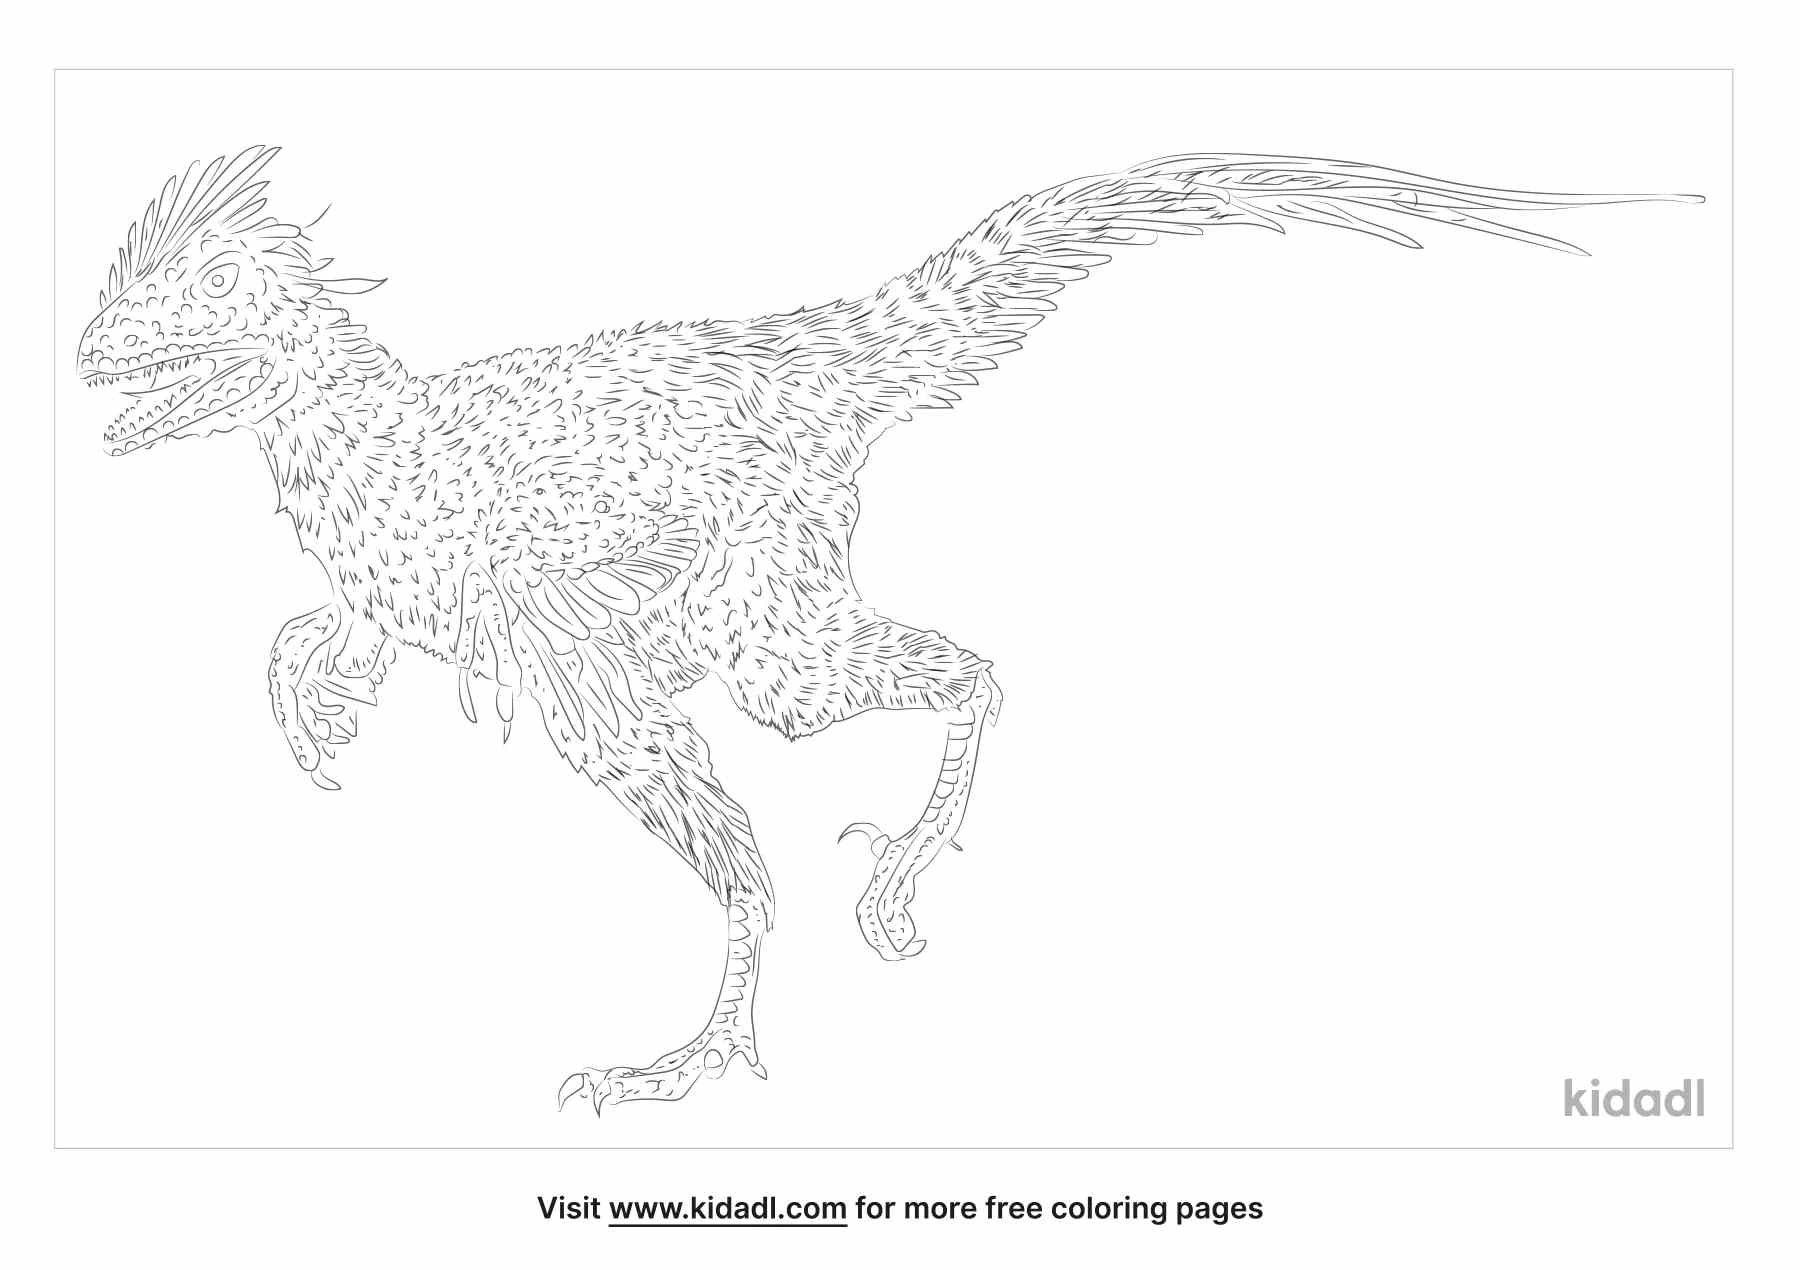 about hesperonychus a small carnivorious dinosaur